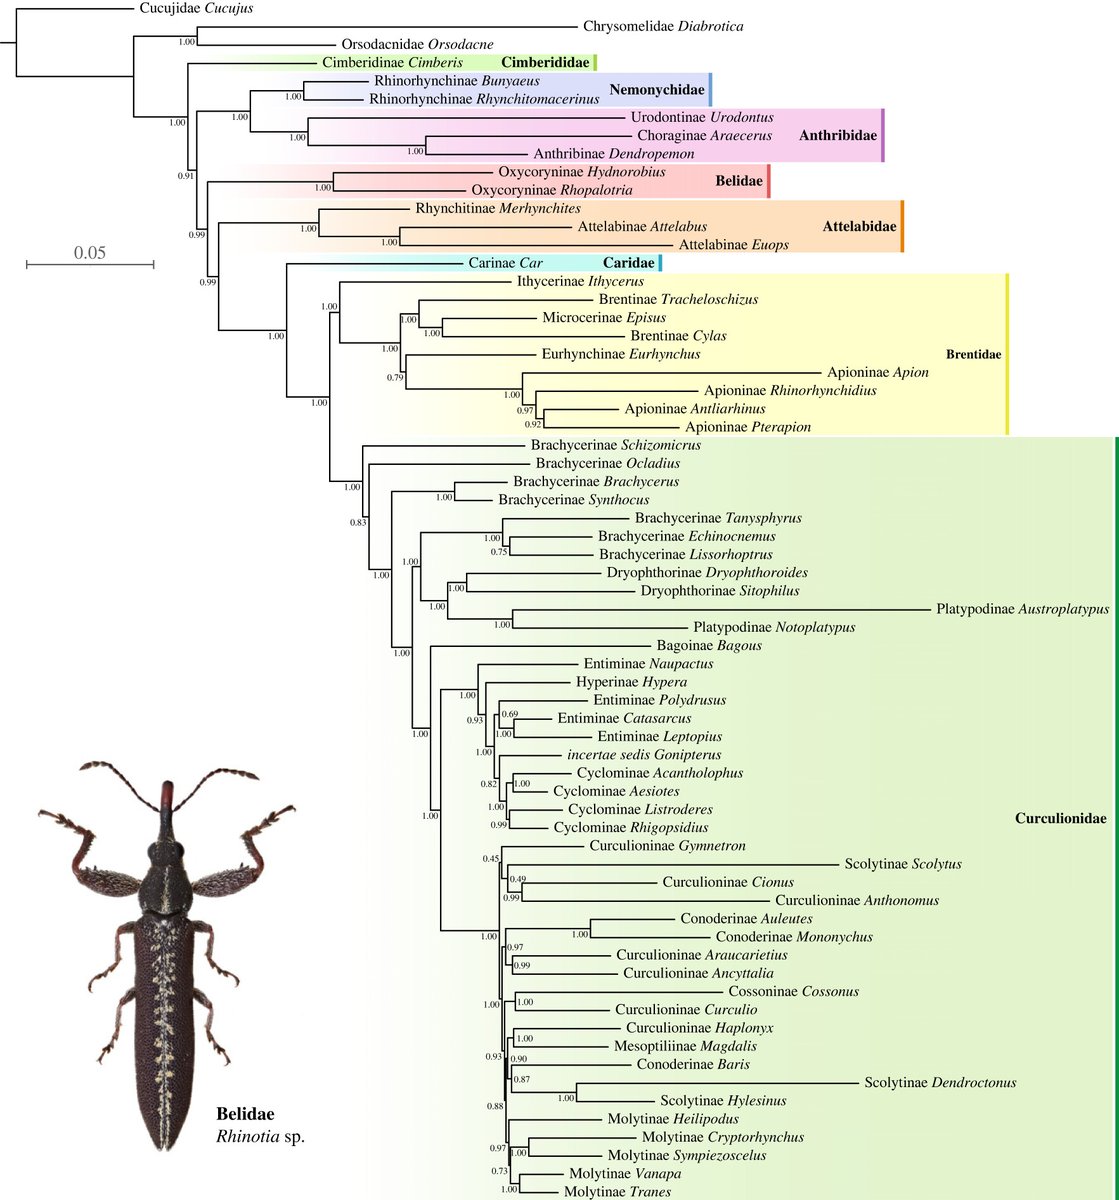 Phylogenomics of weevils revisited: data curation and modelling compositional heterogeneity ow.ly/AKXg50PNNxm #phylogeny #weevils #Beetle #BiologyLetters